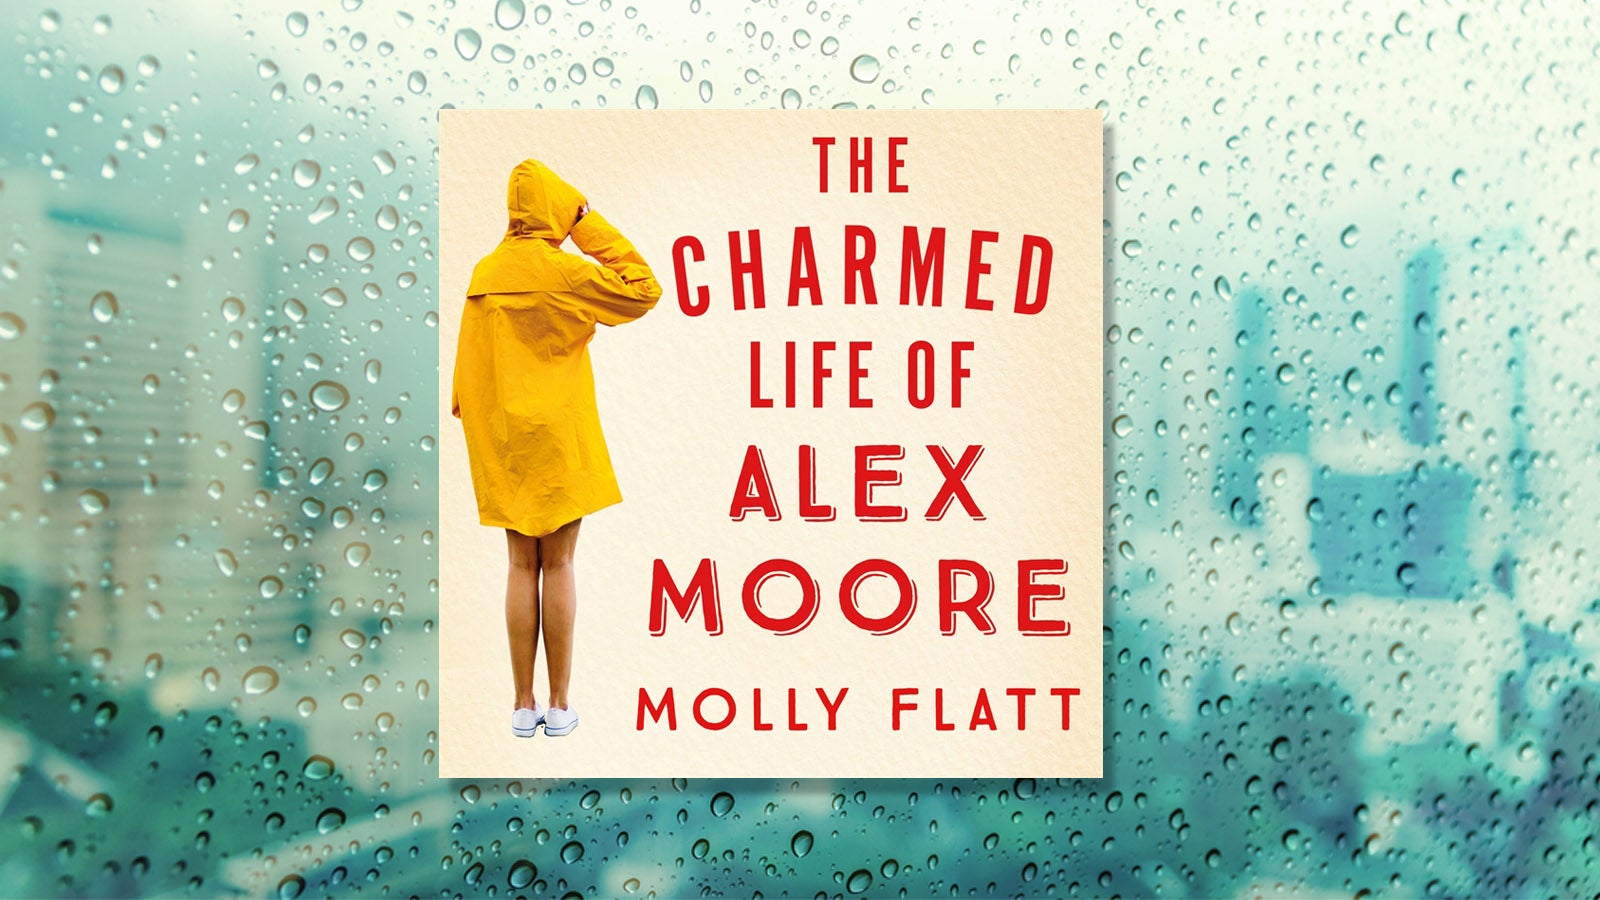 Audiobook cover for the Charmed Life of Alex Moore against the background of a rainy window